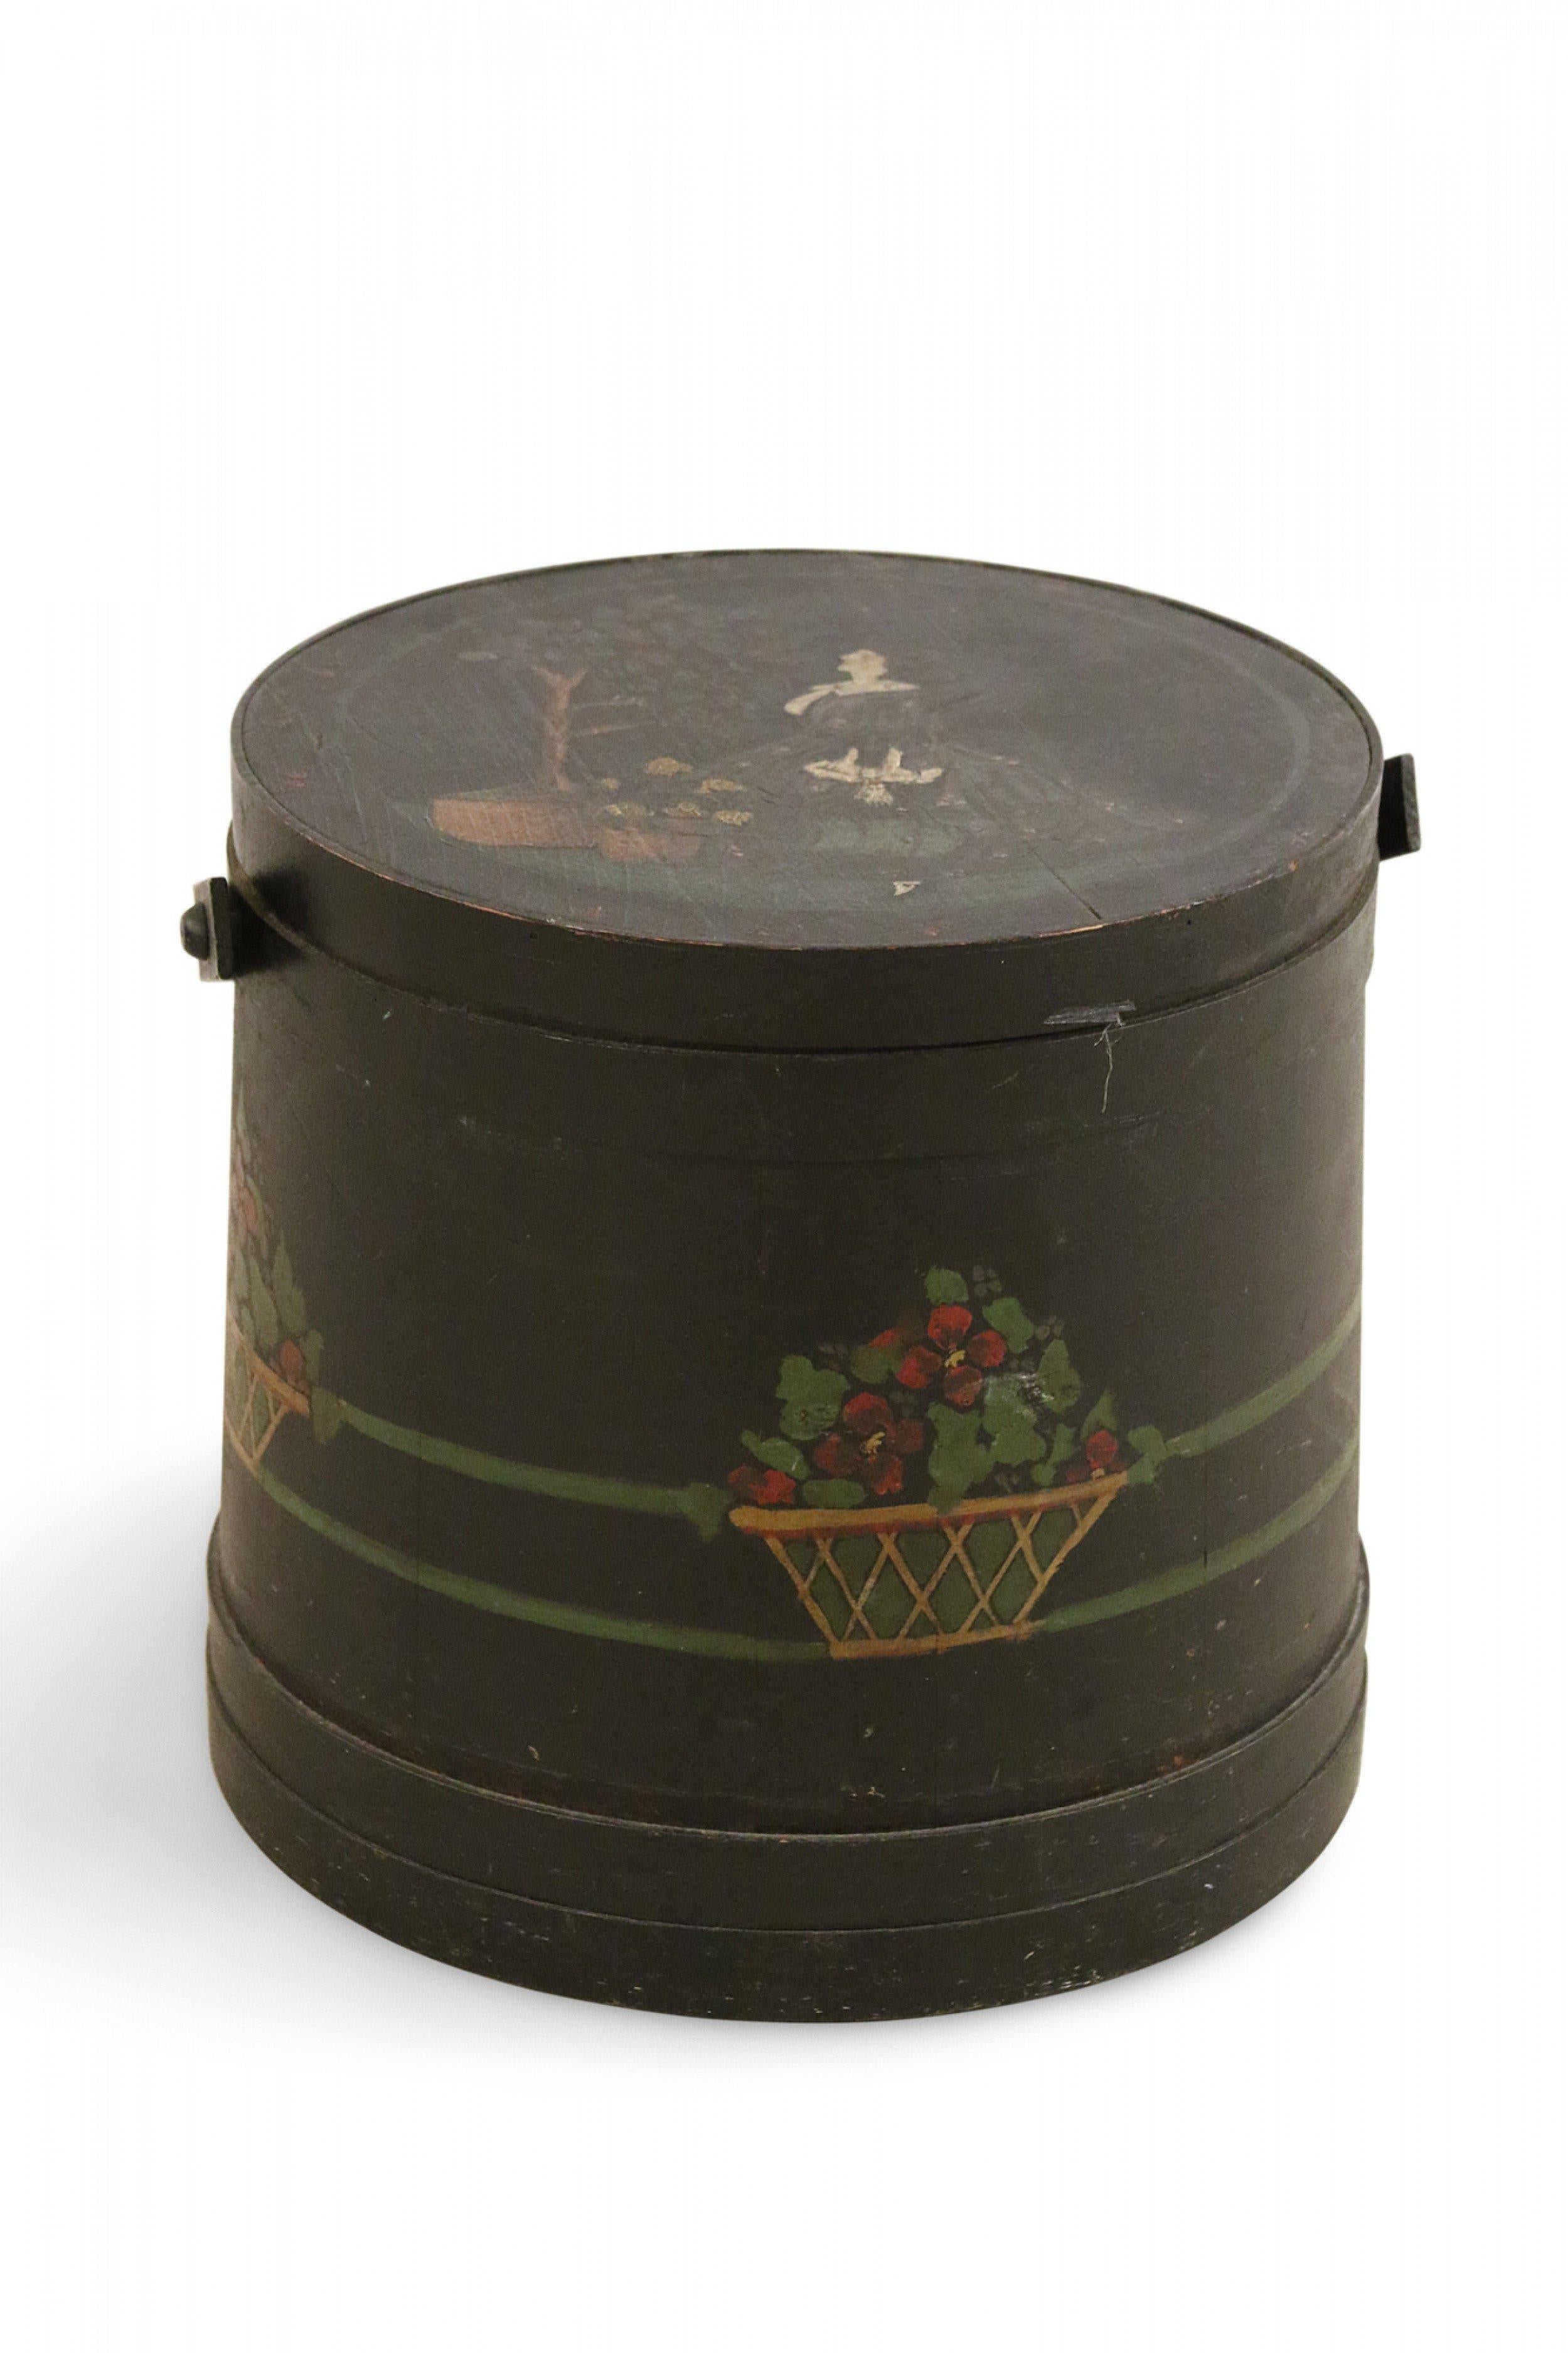 American Country banded wooden sugar bucket sewing box painted black with a blue fabric lined interior with pockets and a hand-painted genre scene of a woman watering plants on top lid. (Mayfair Toeturn).
 